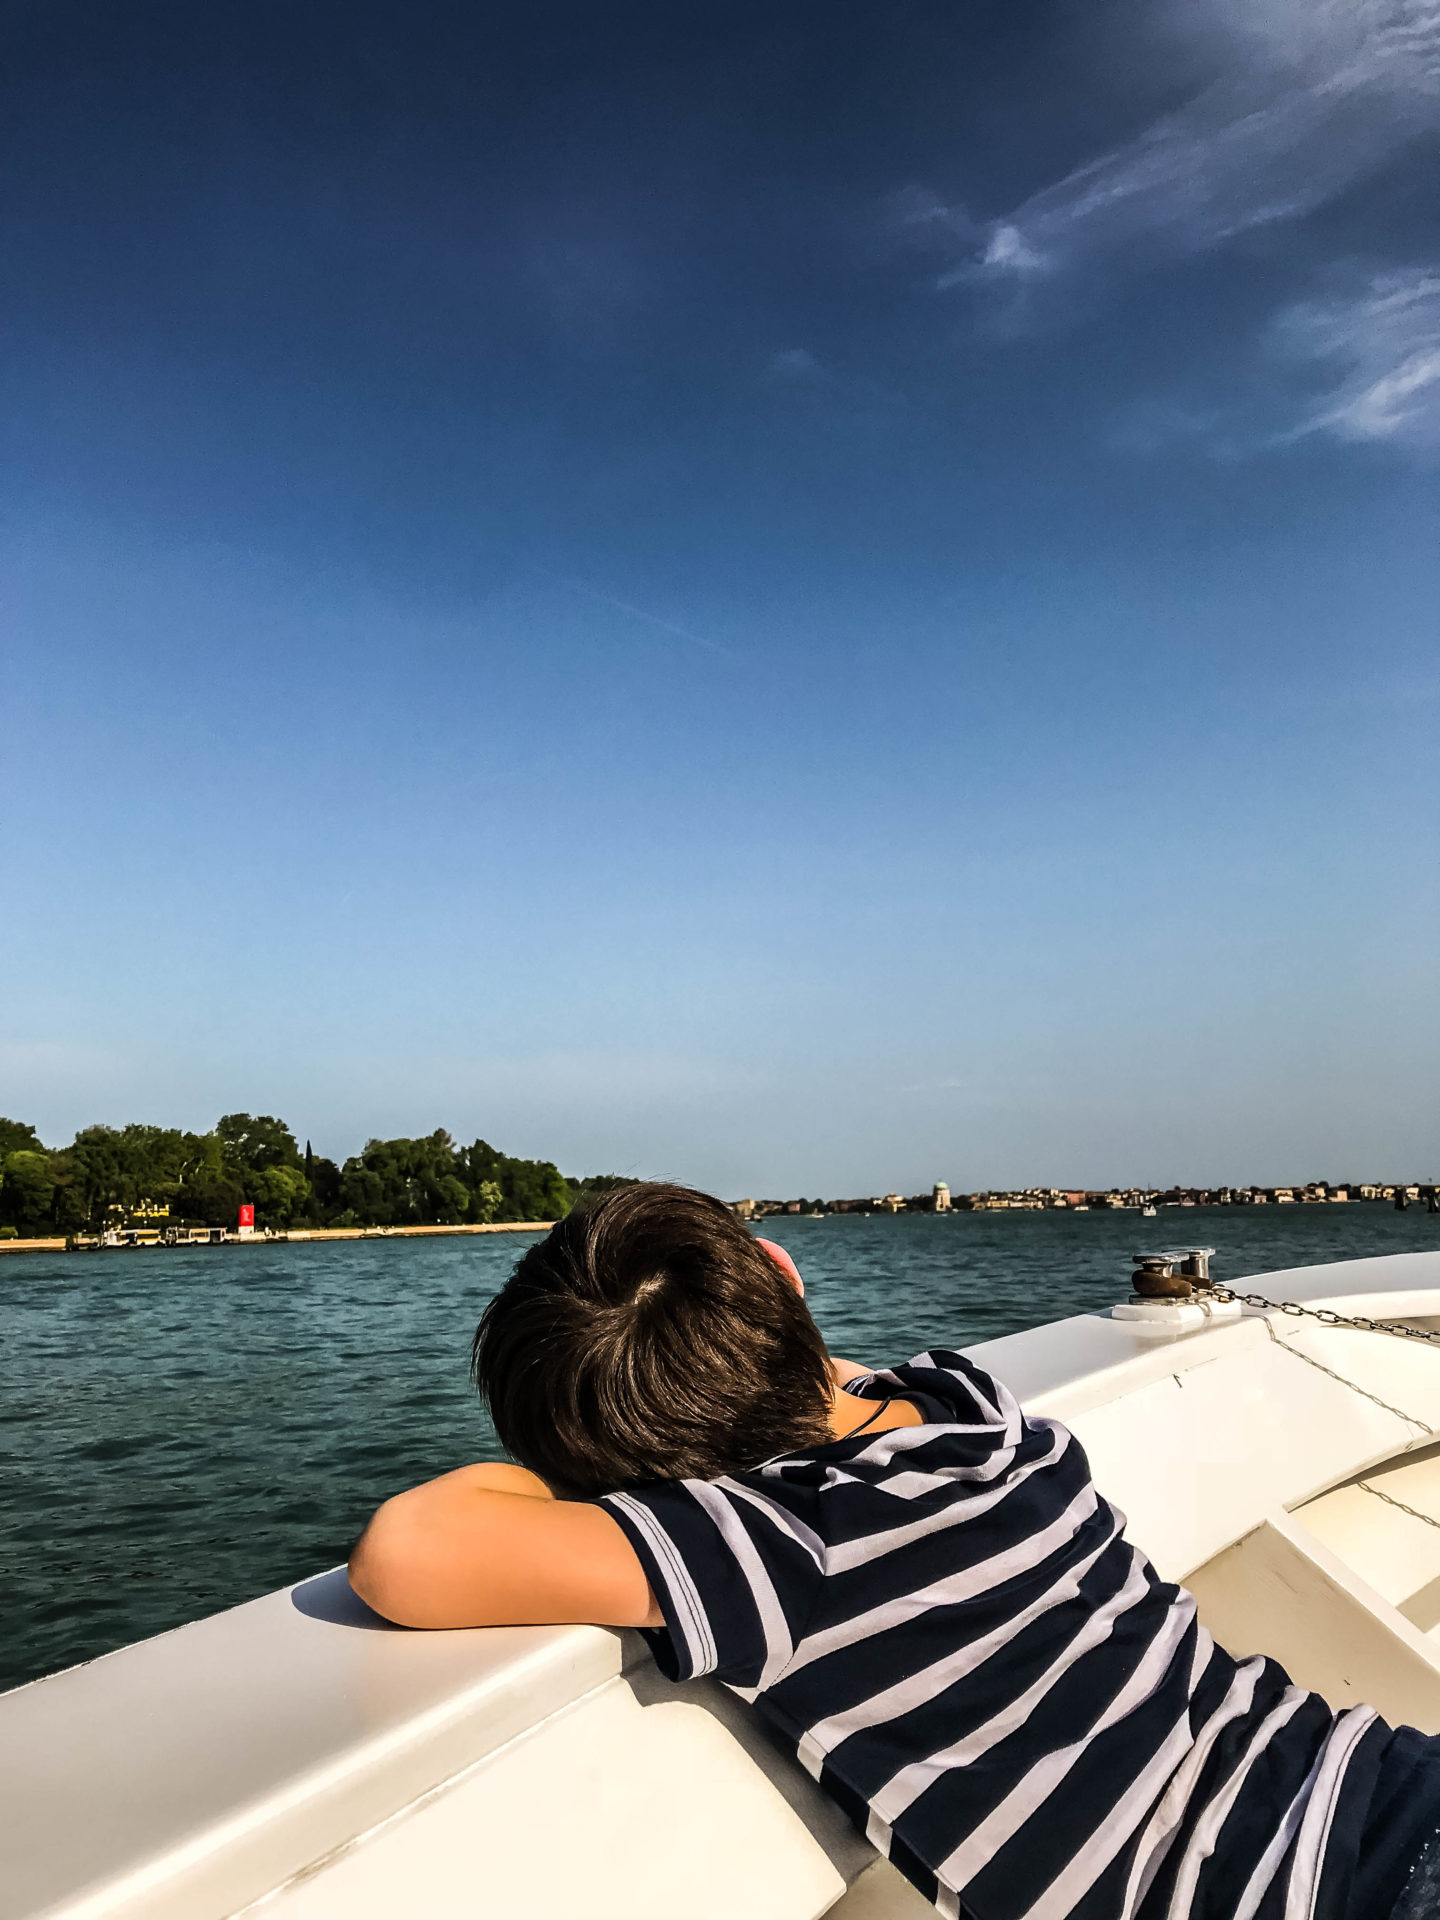 My son relaxing on the boat ride back from Venice